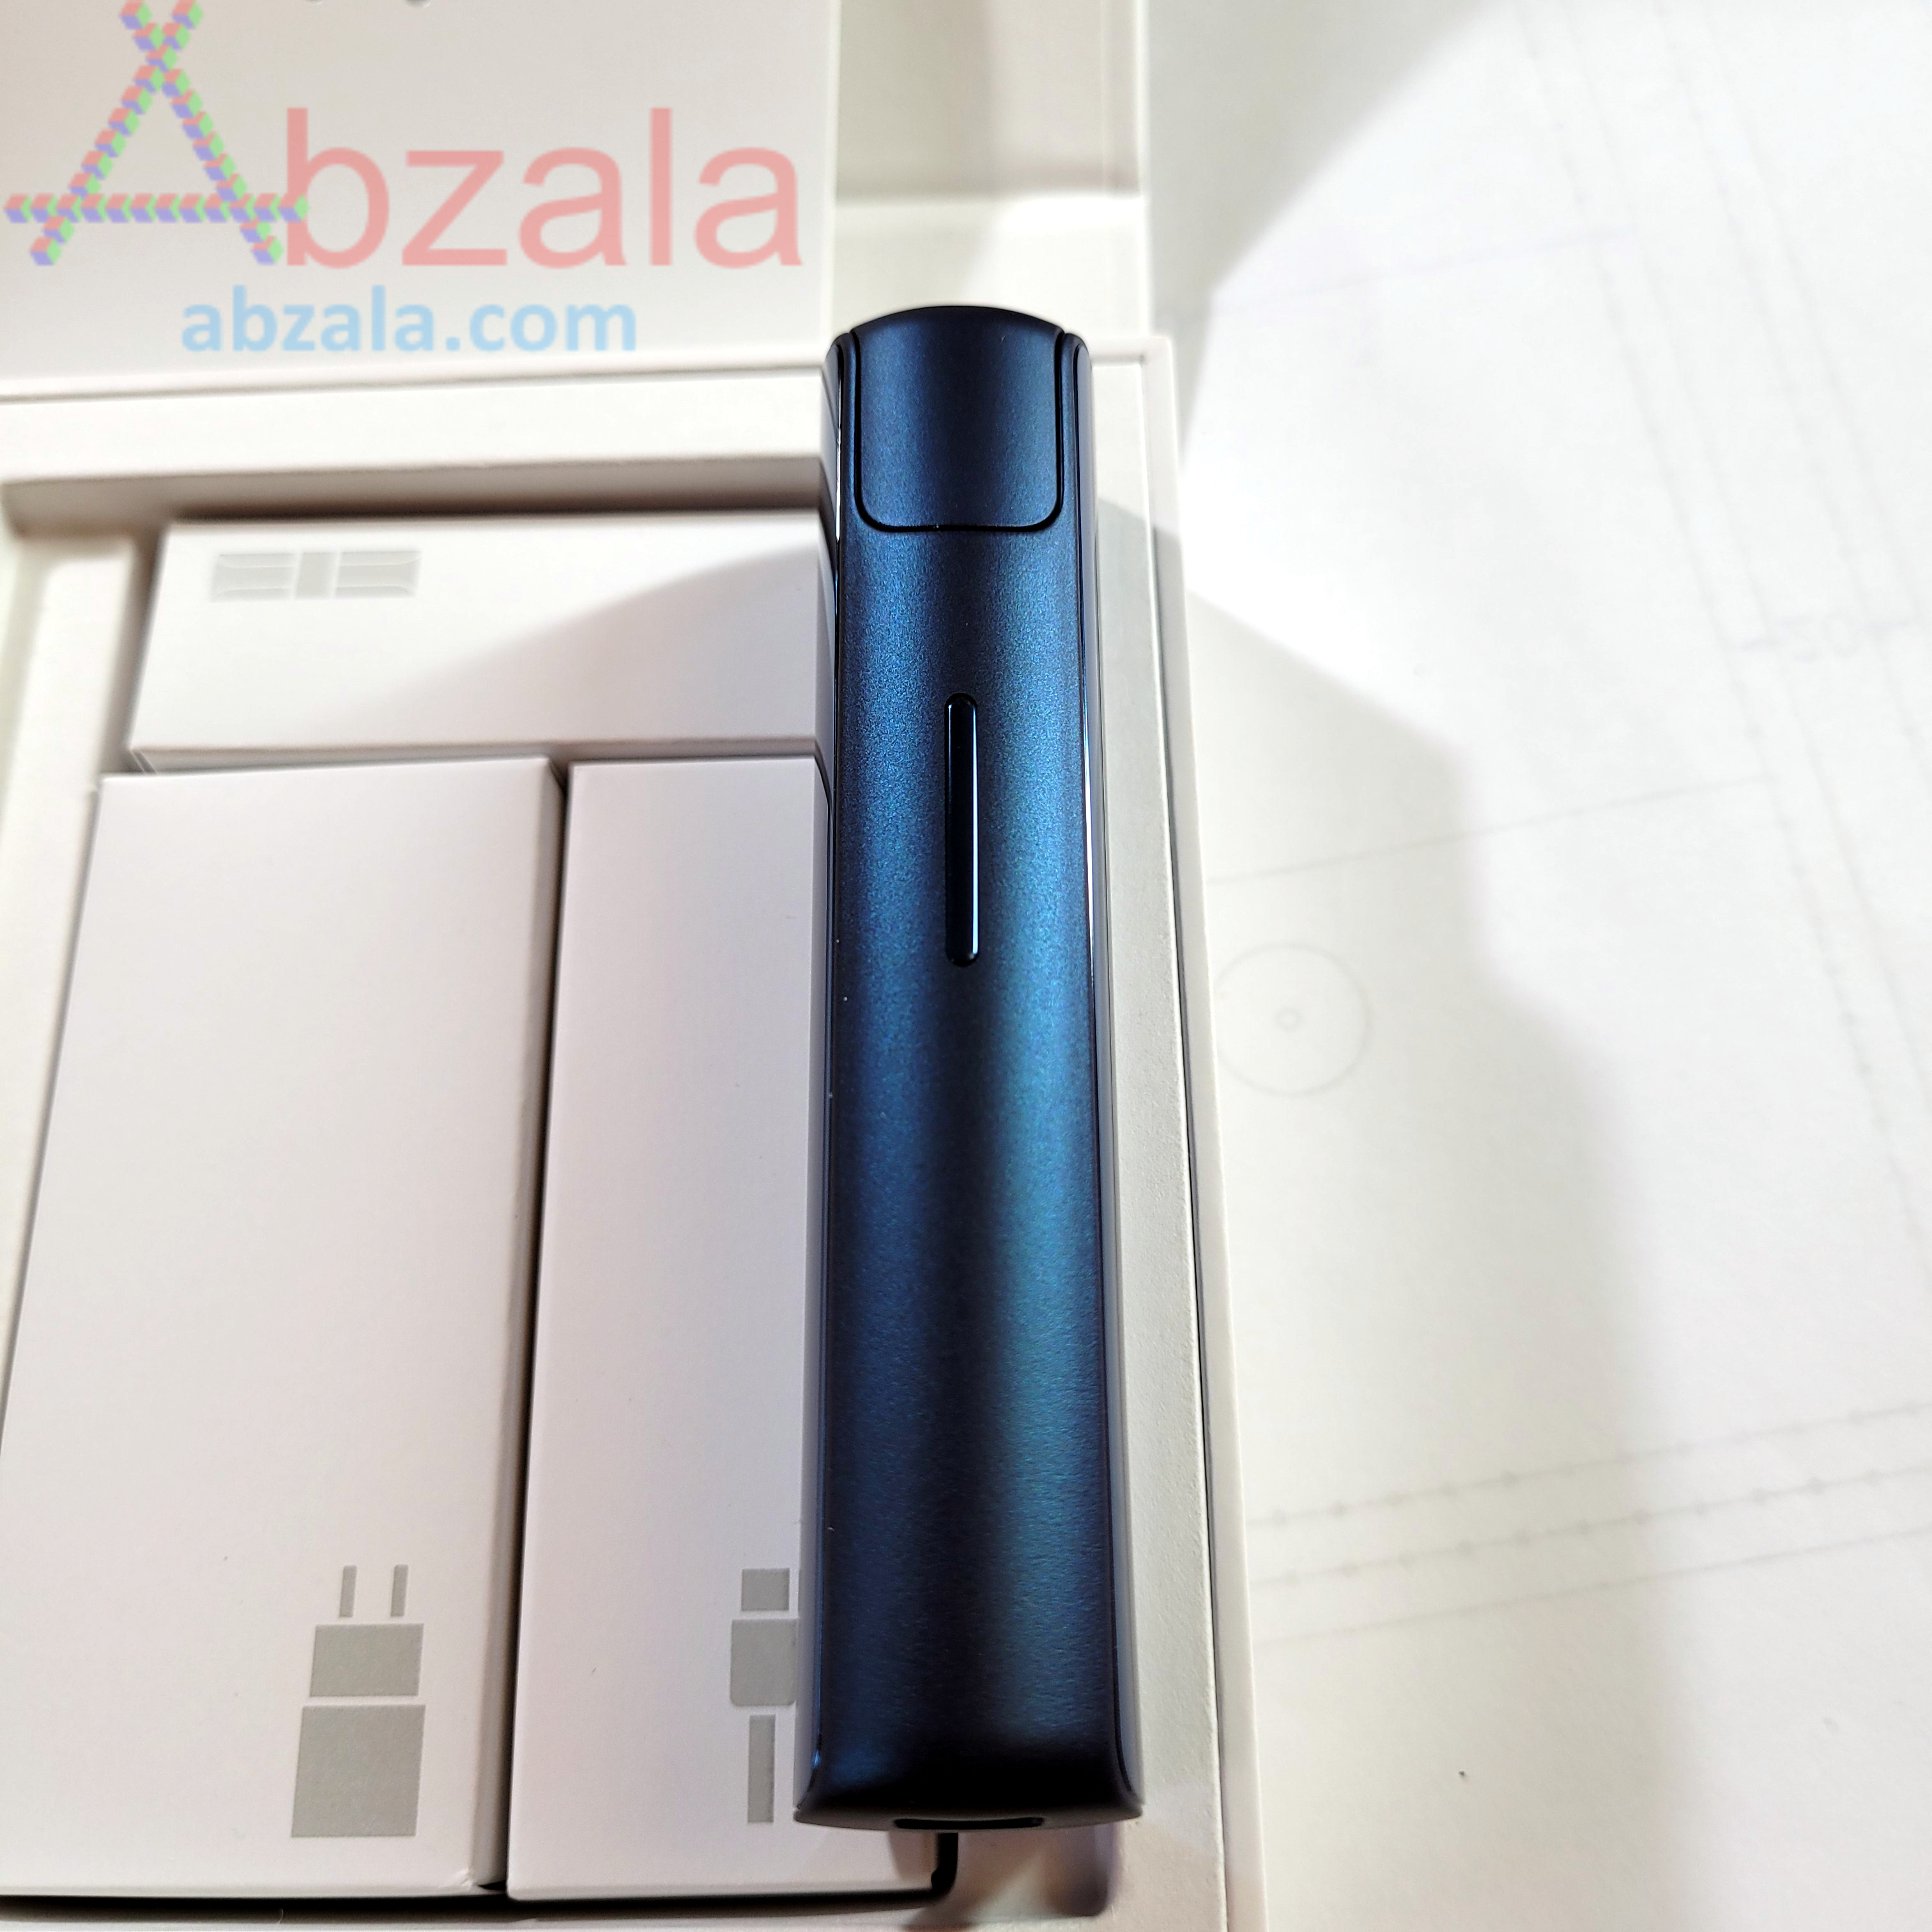 IQOS lil solid 2.0 - Enjoy The Test of Real Tobacco